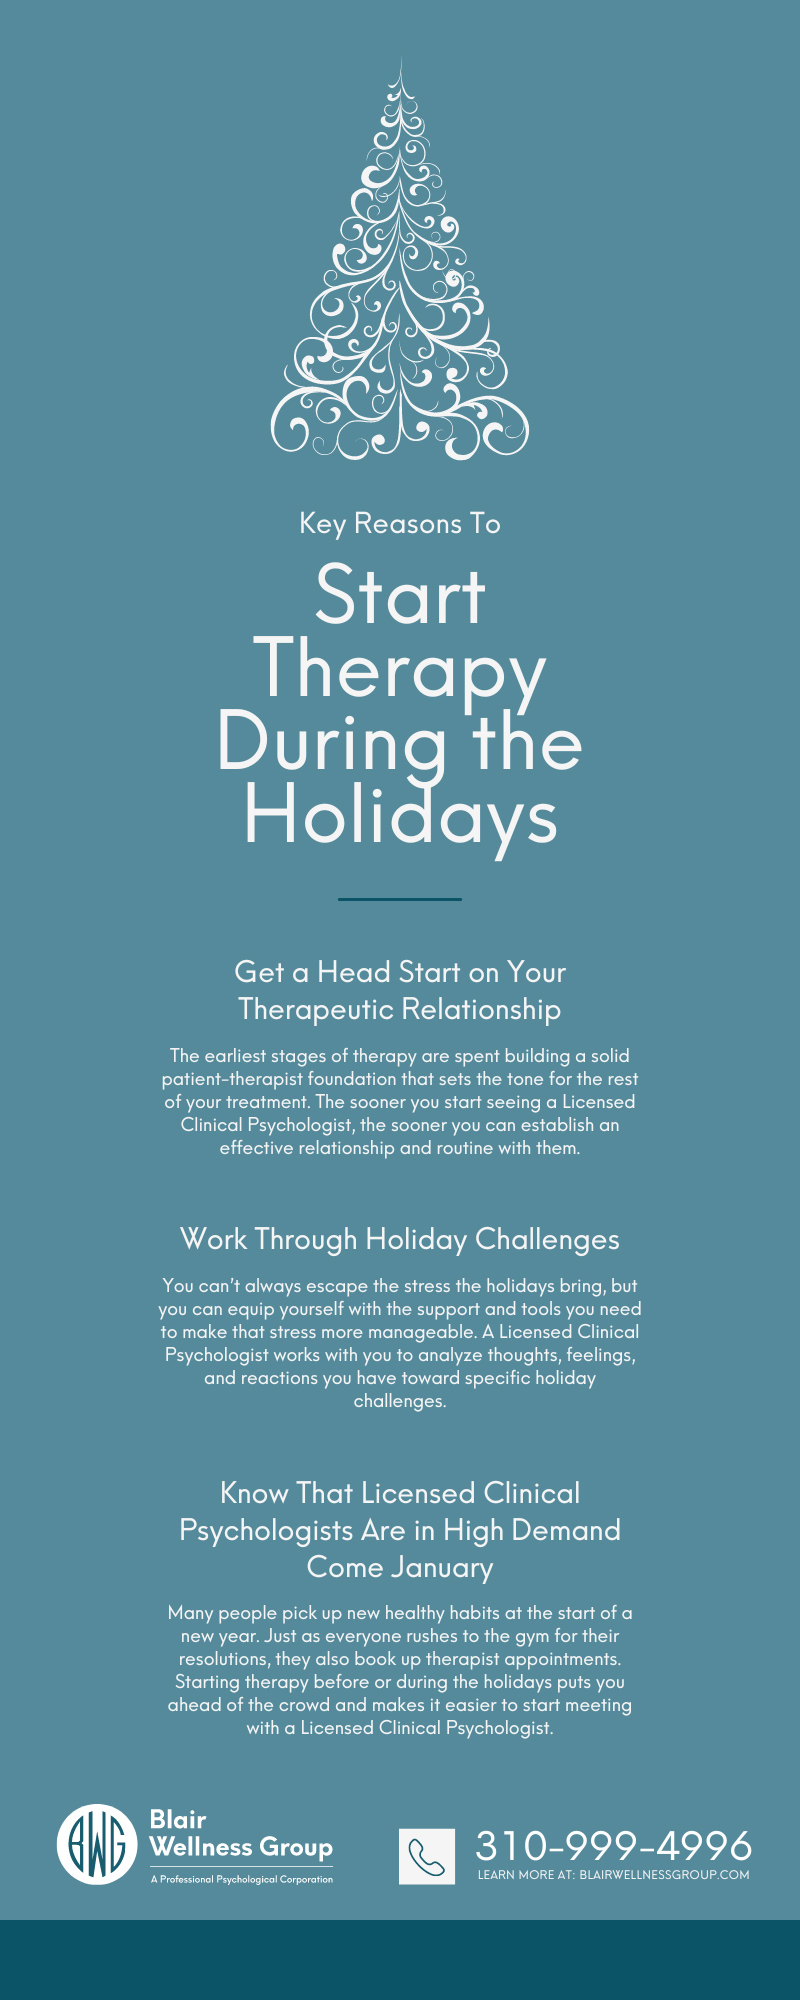 Key Reasons To Start Therapy During the Holidays